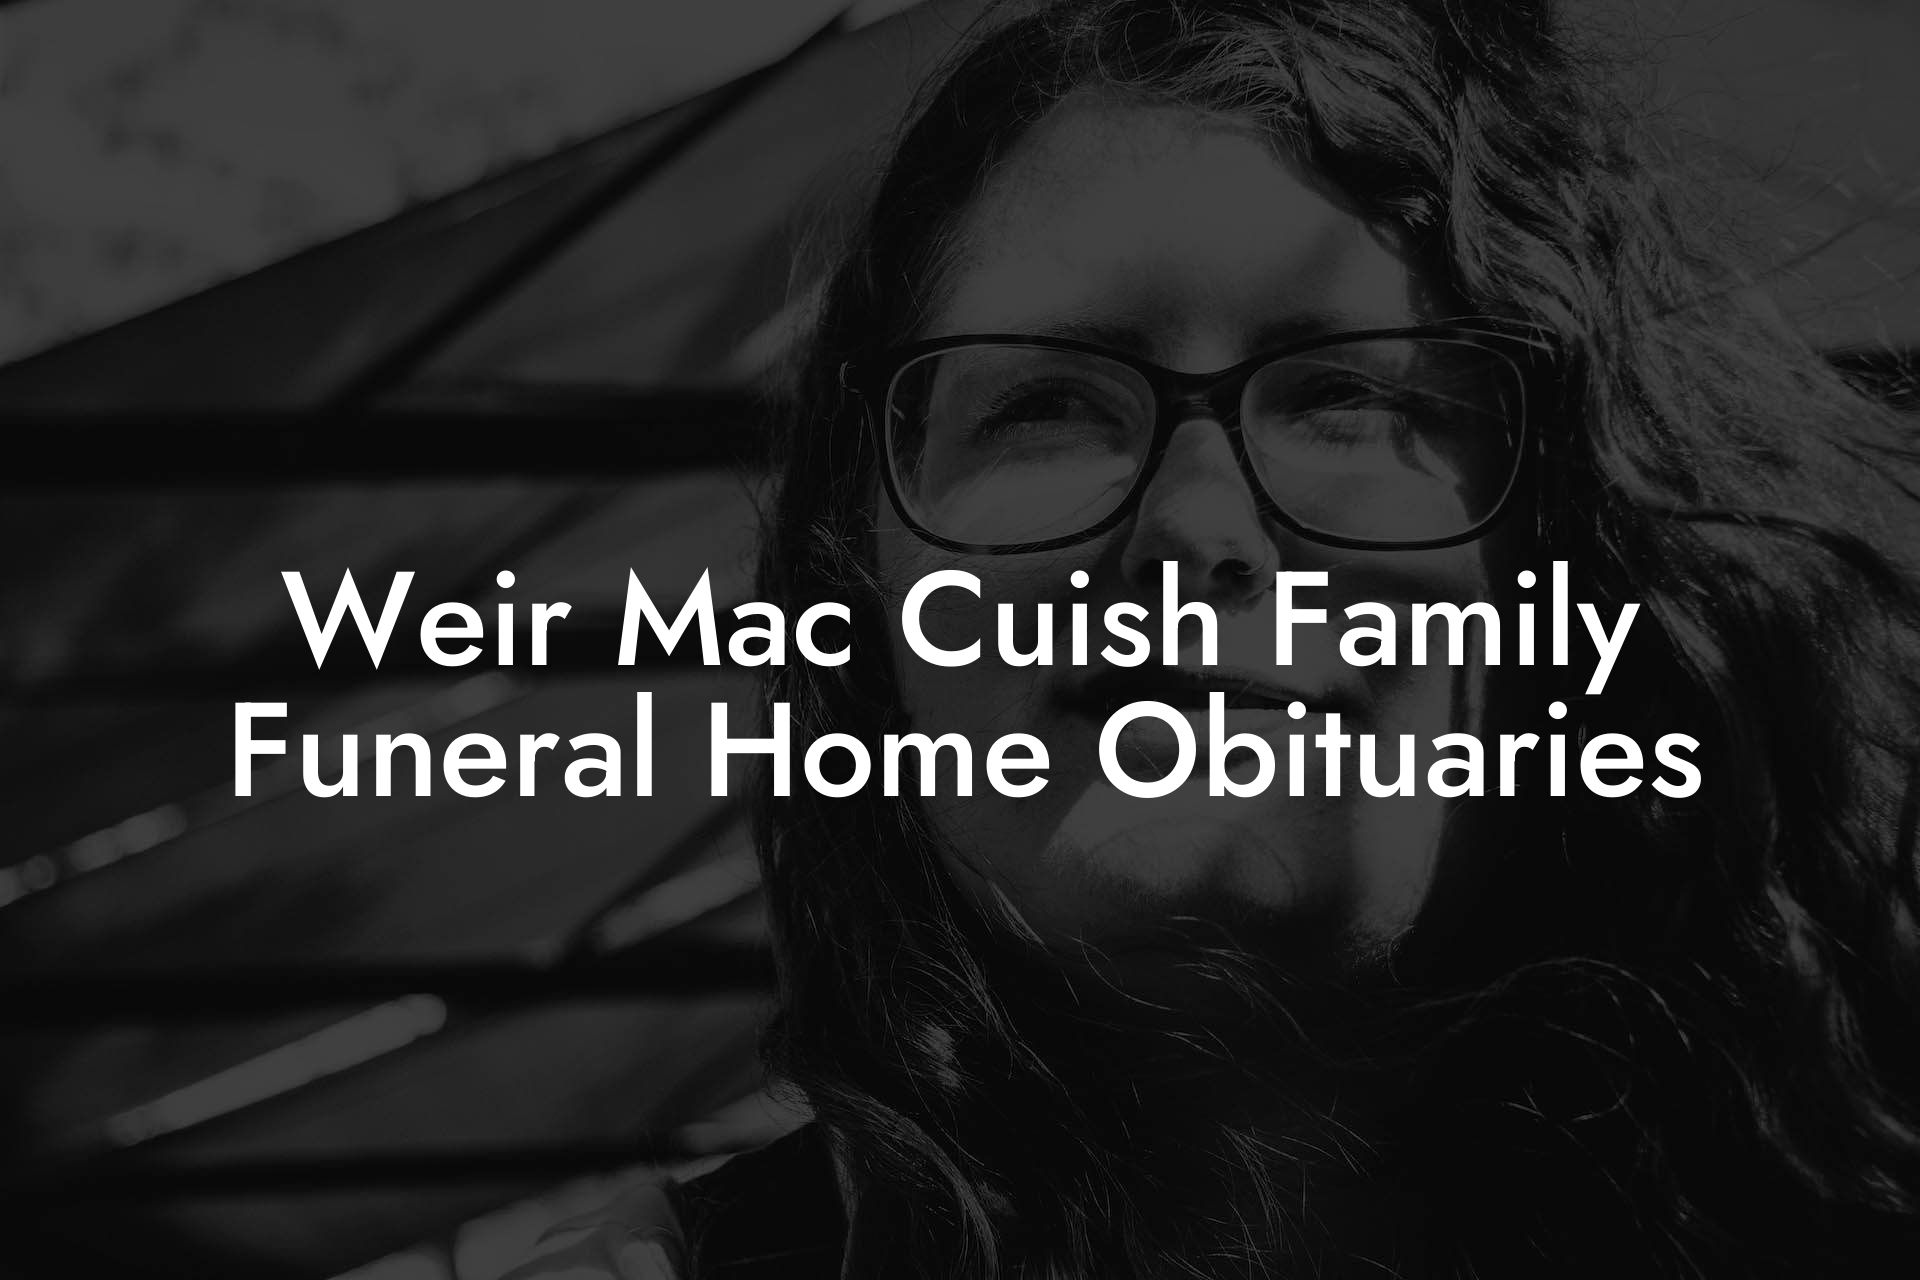 Weir Mac Cuish Family Funeral Home Obituaries